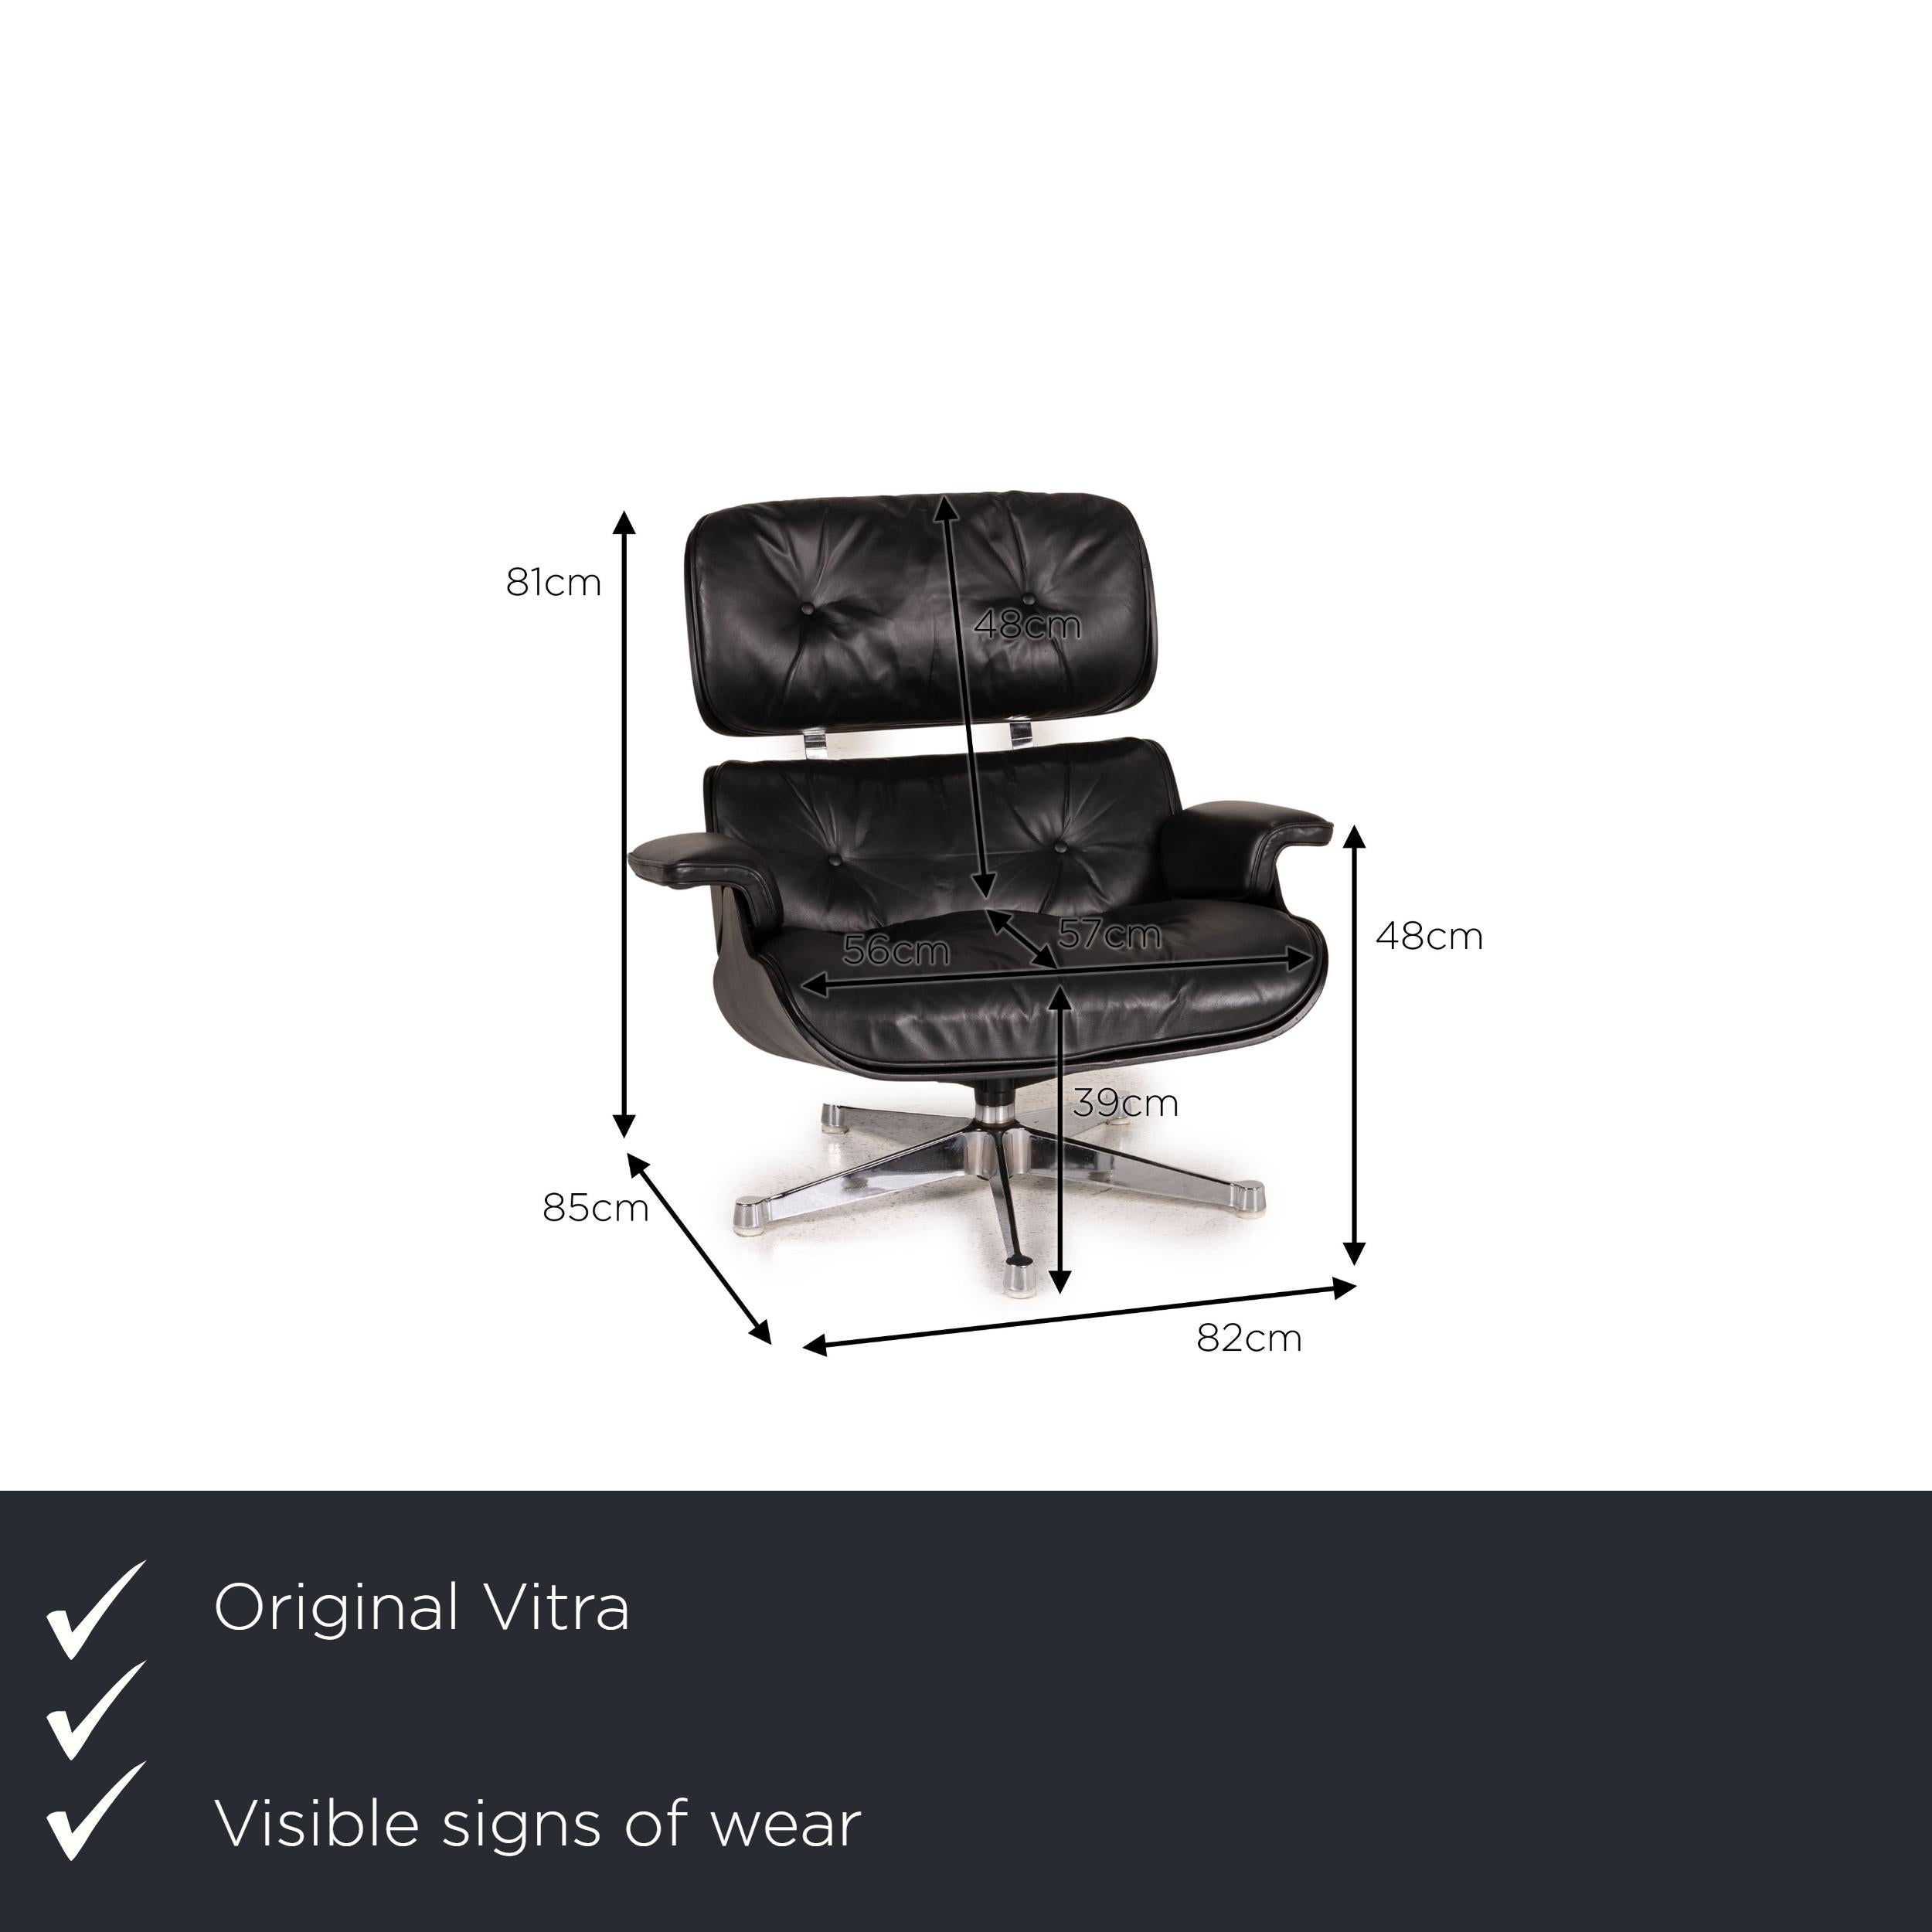 We present to you a Vitra Eameas lounge leather armchair black including ottoman.
 SKU: #16349-c1
 

 Product measurements in centimeters:
 

 depth: 85
 width: 82
 height: 81
 seat height: 39
 rest height: 48
 seat depth: 57
 seat